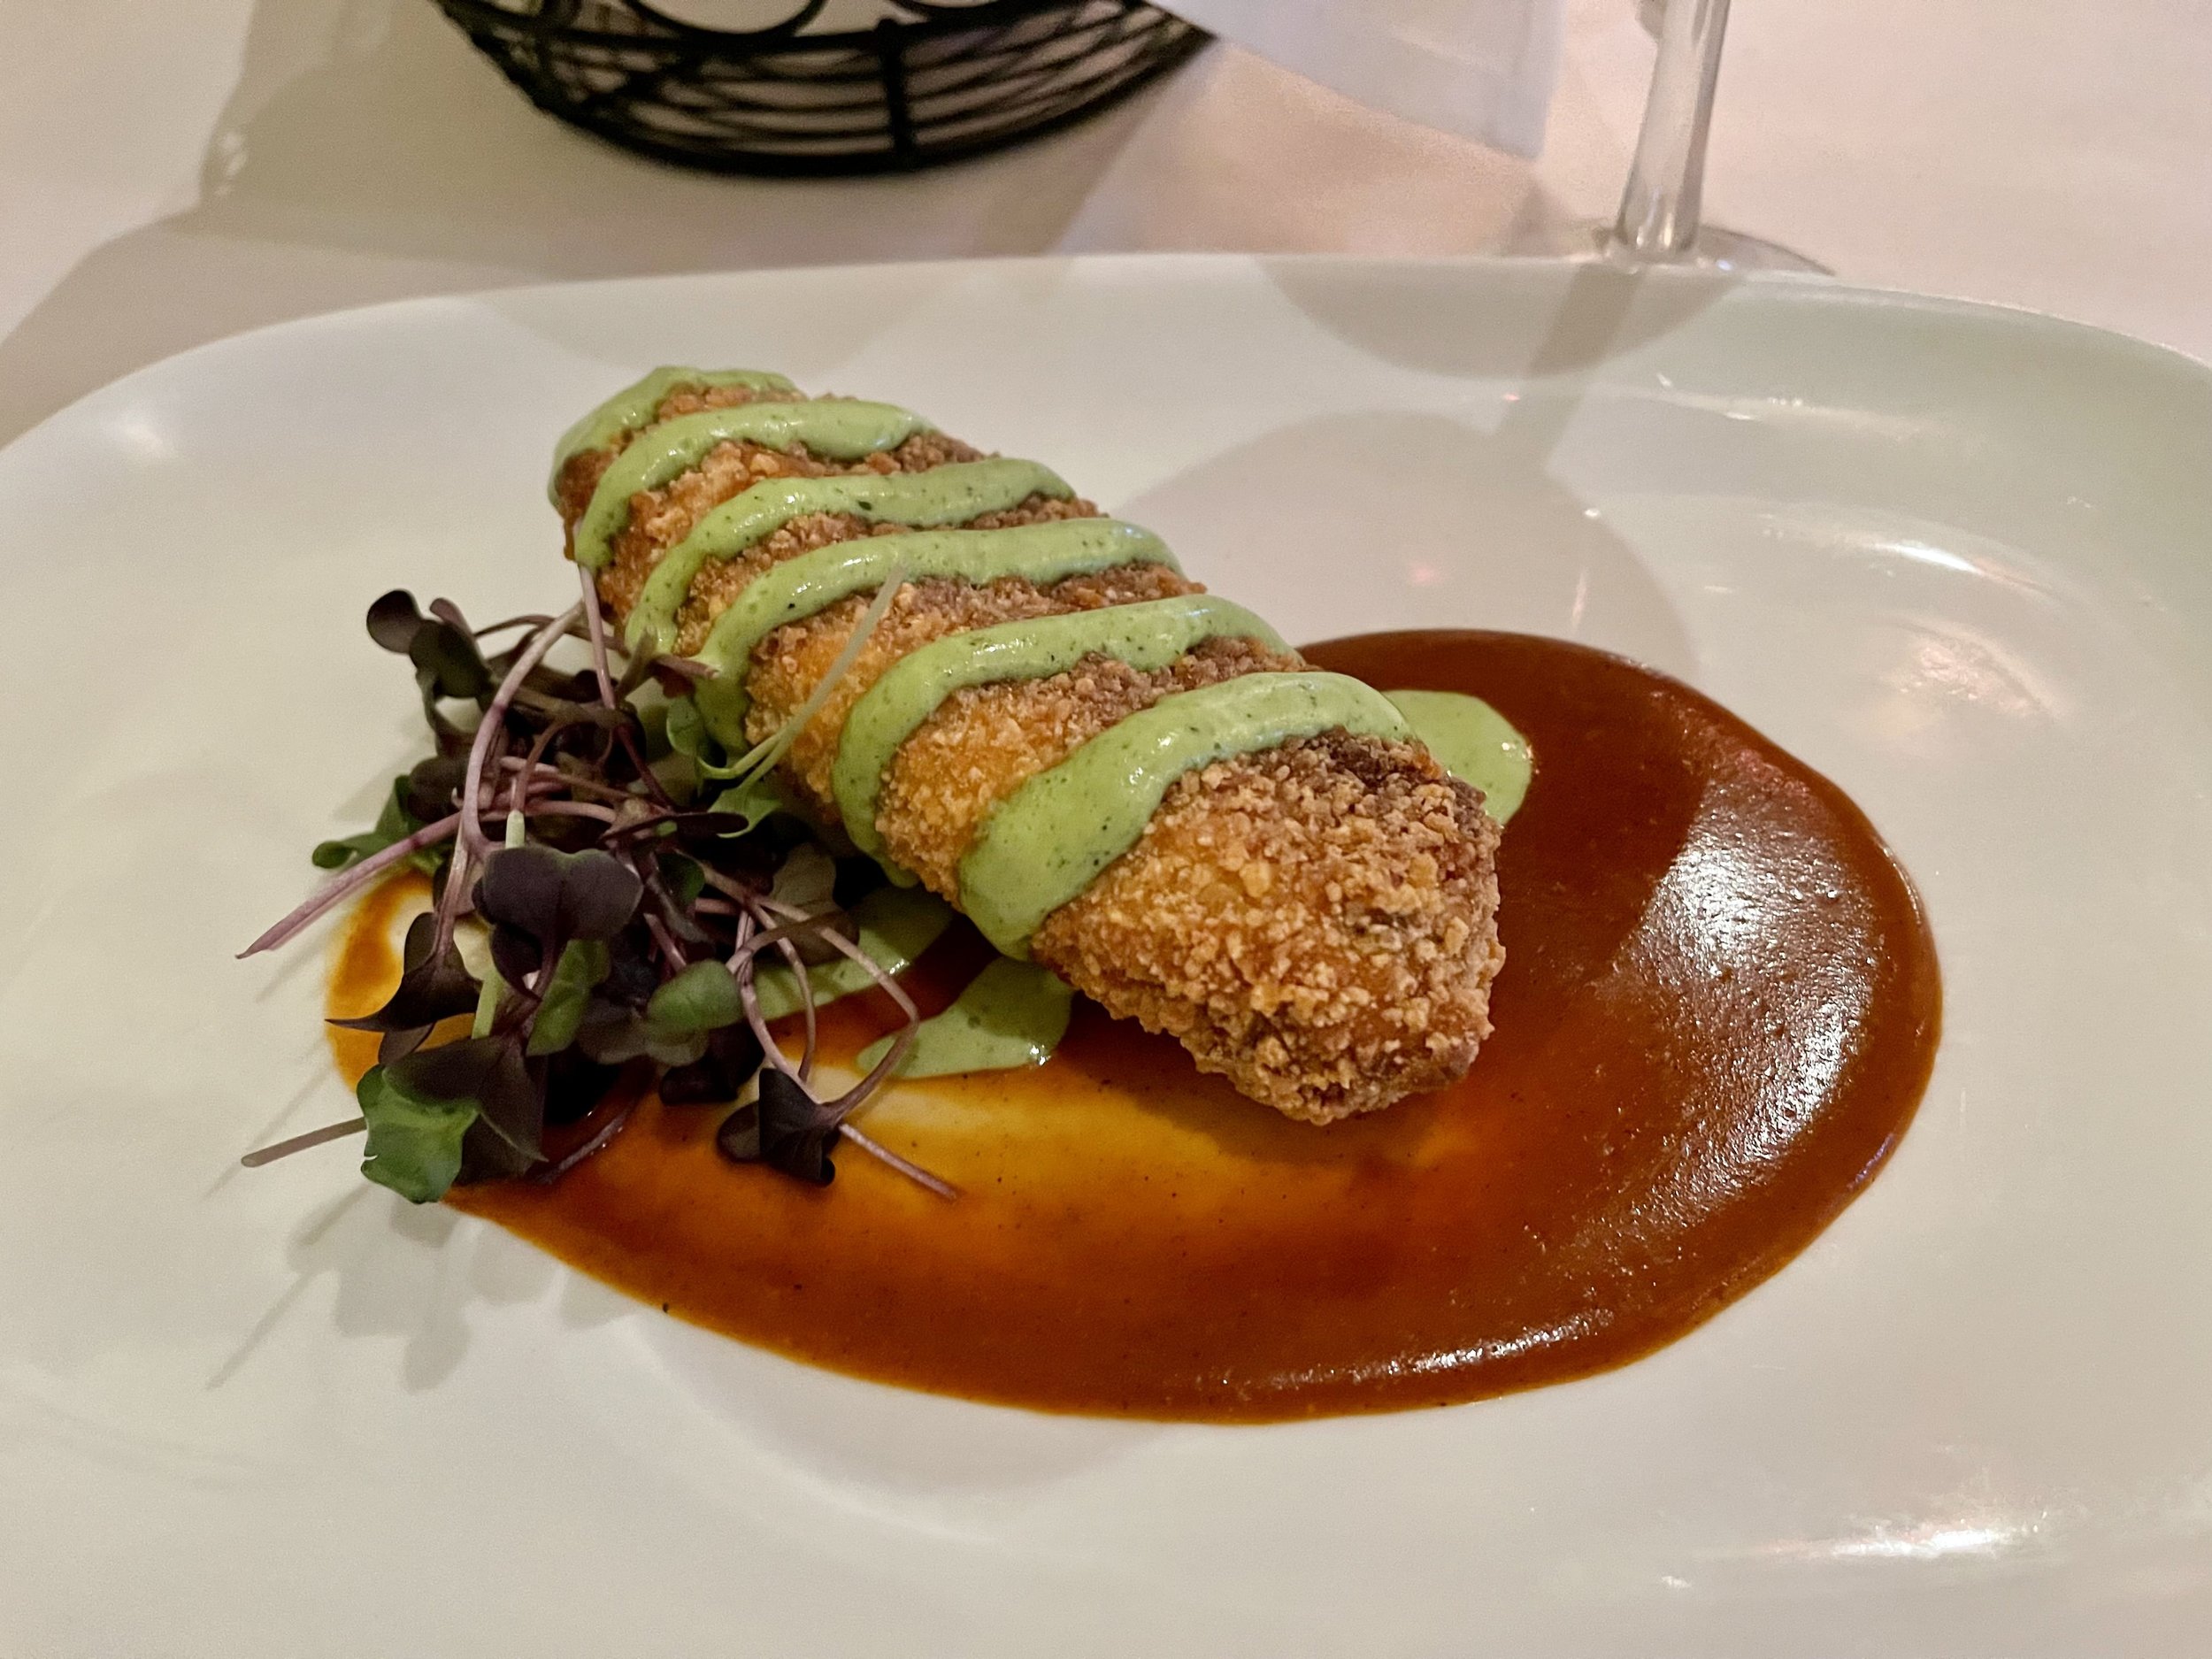 A unique Chile Relleno stuffed with bison at a New Mexican restaurant in Taos.